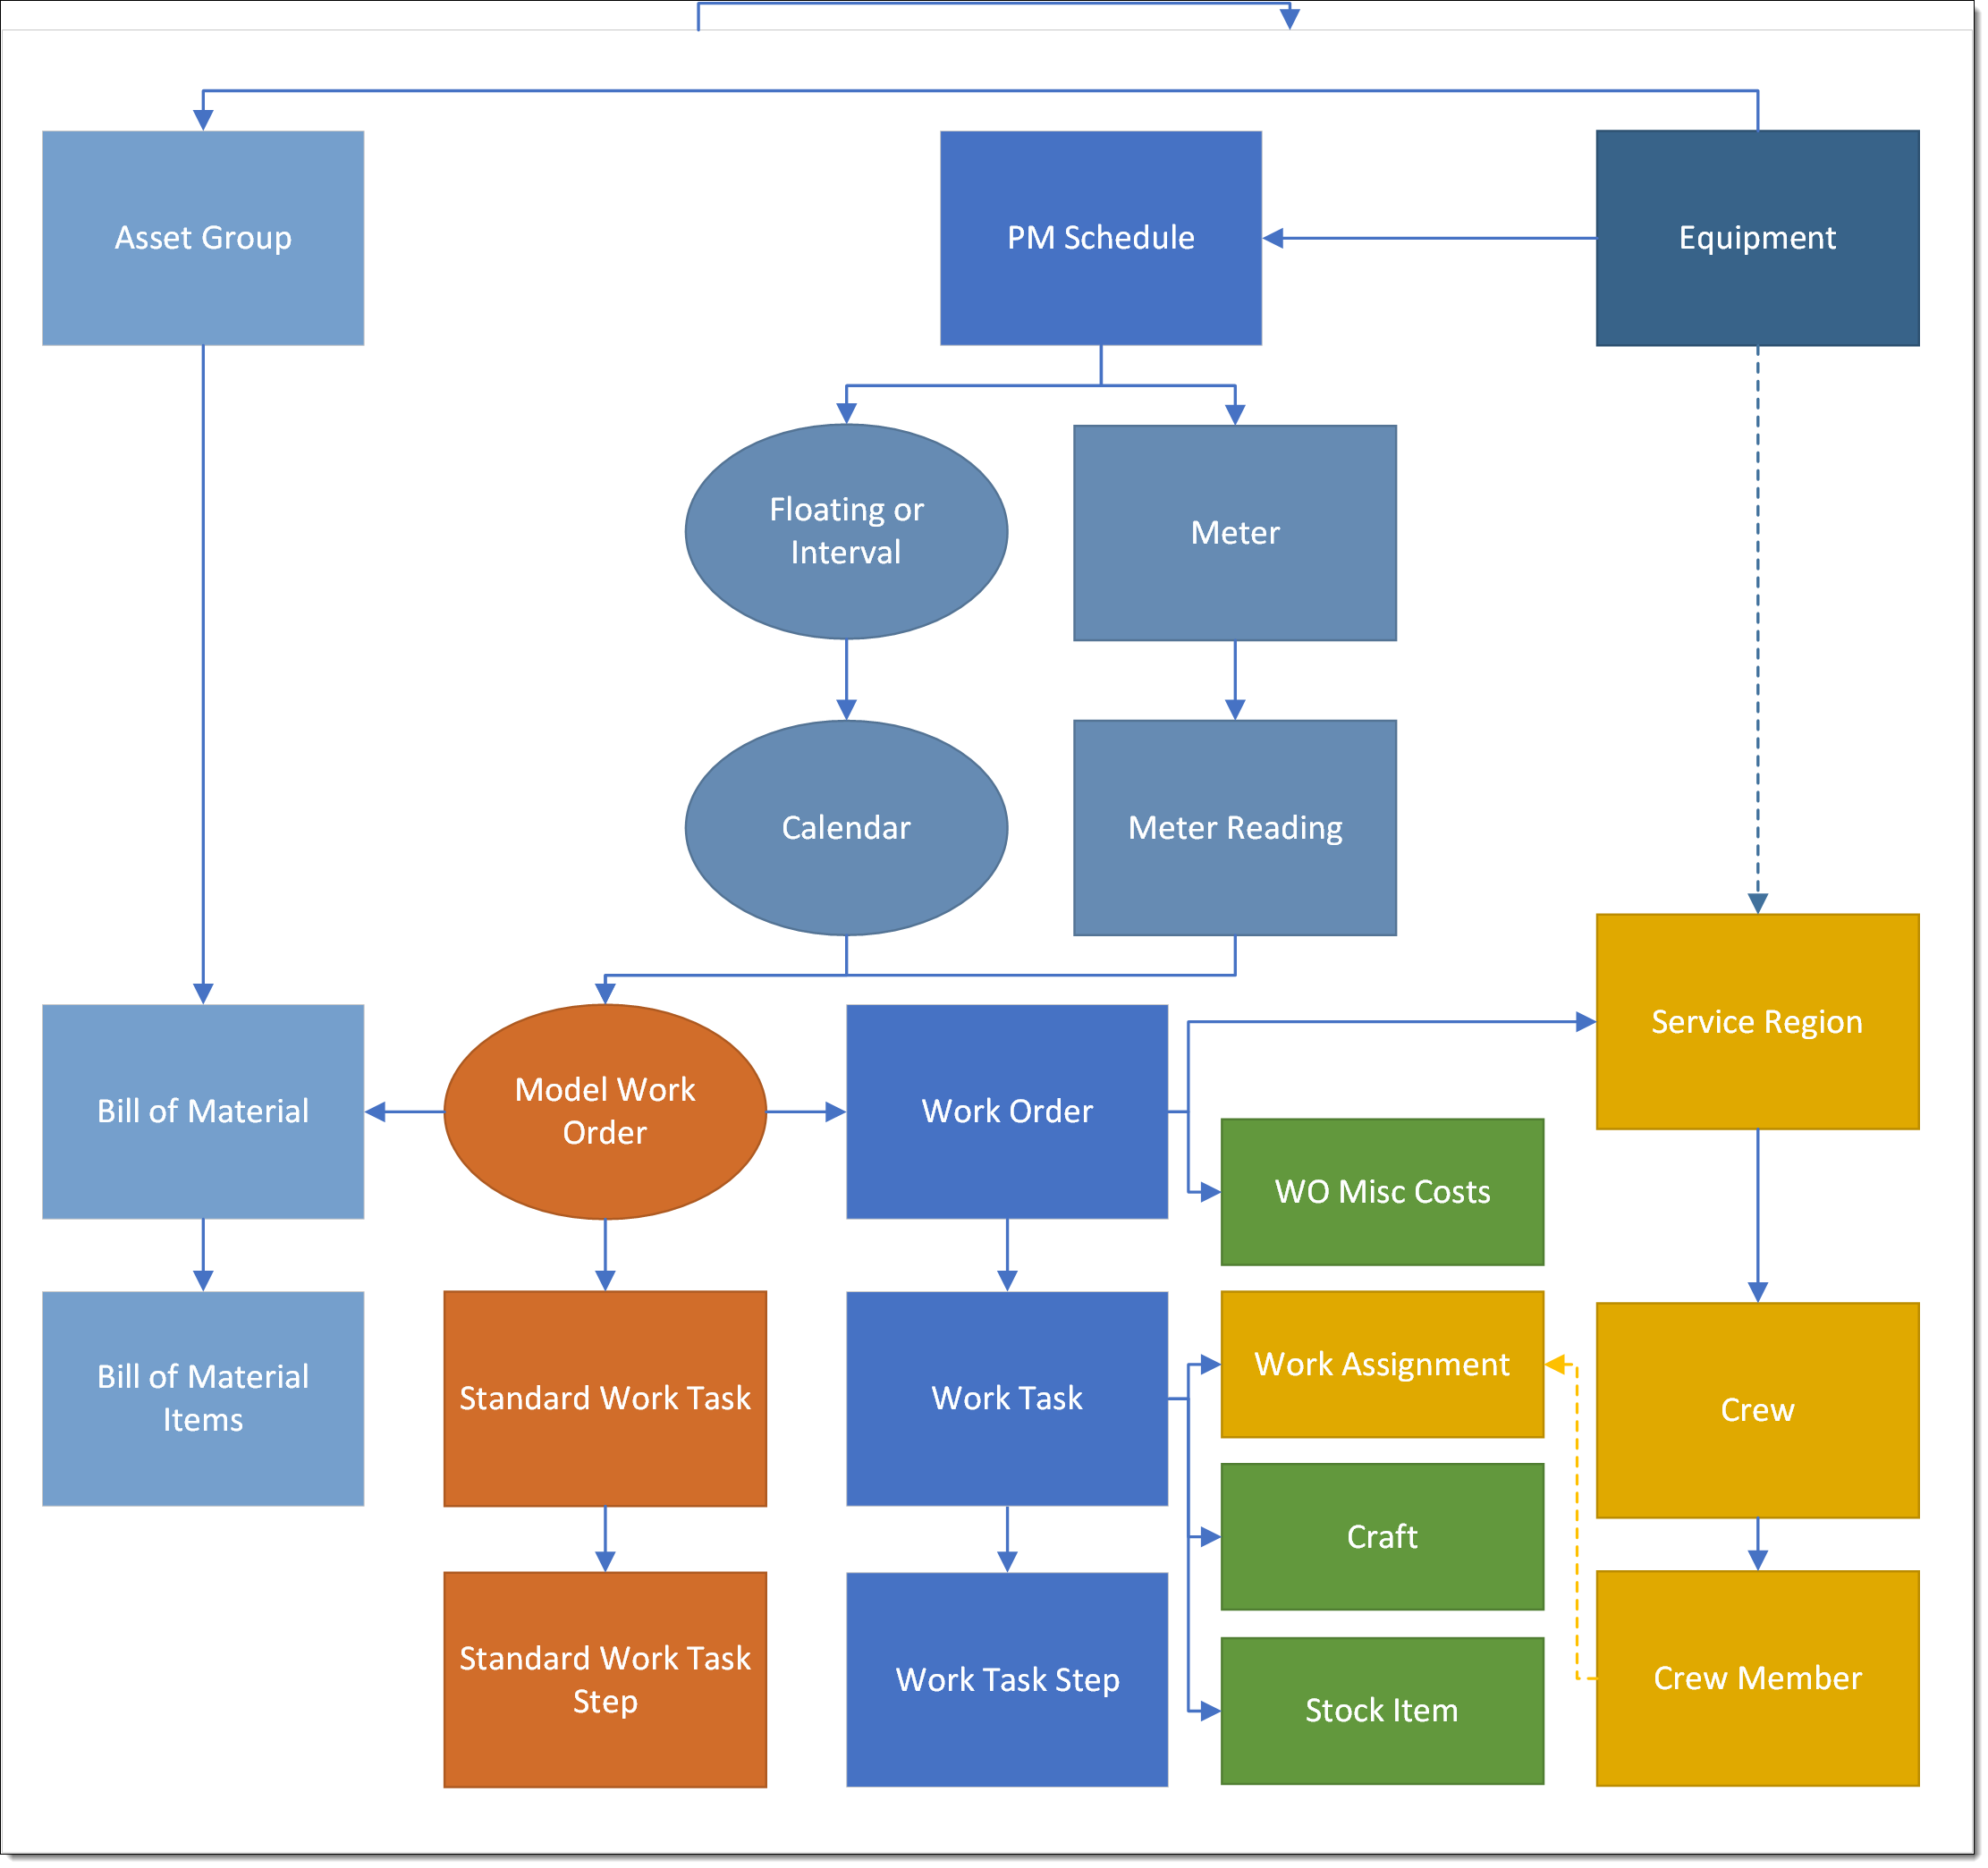 Flowchart showing the objects related to PM Schedules